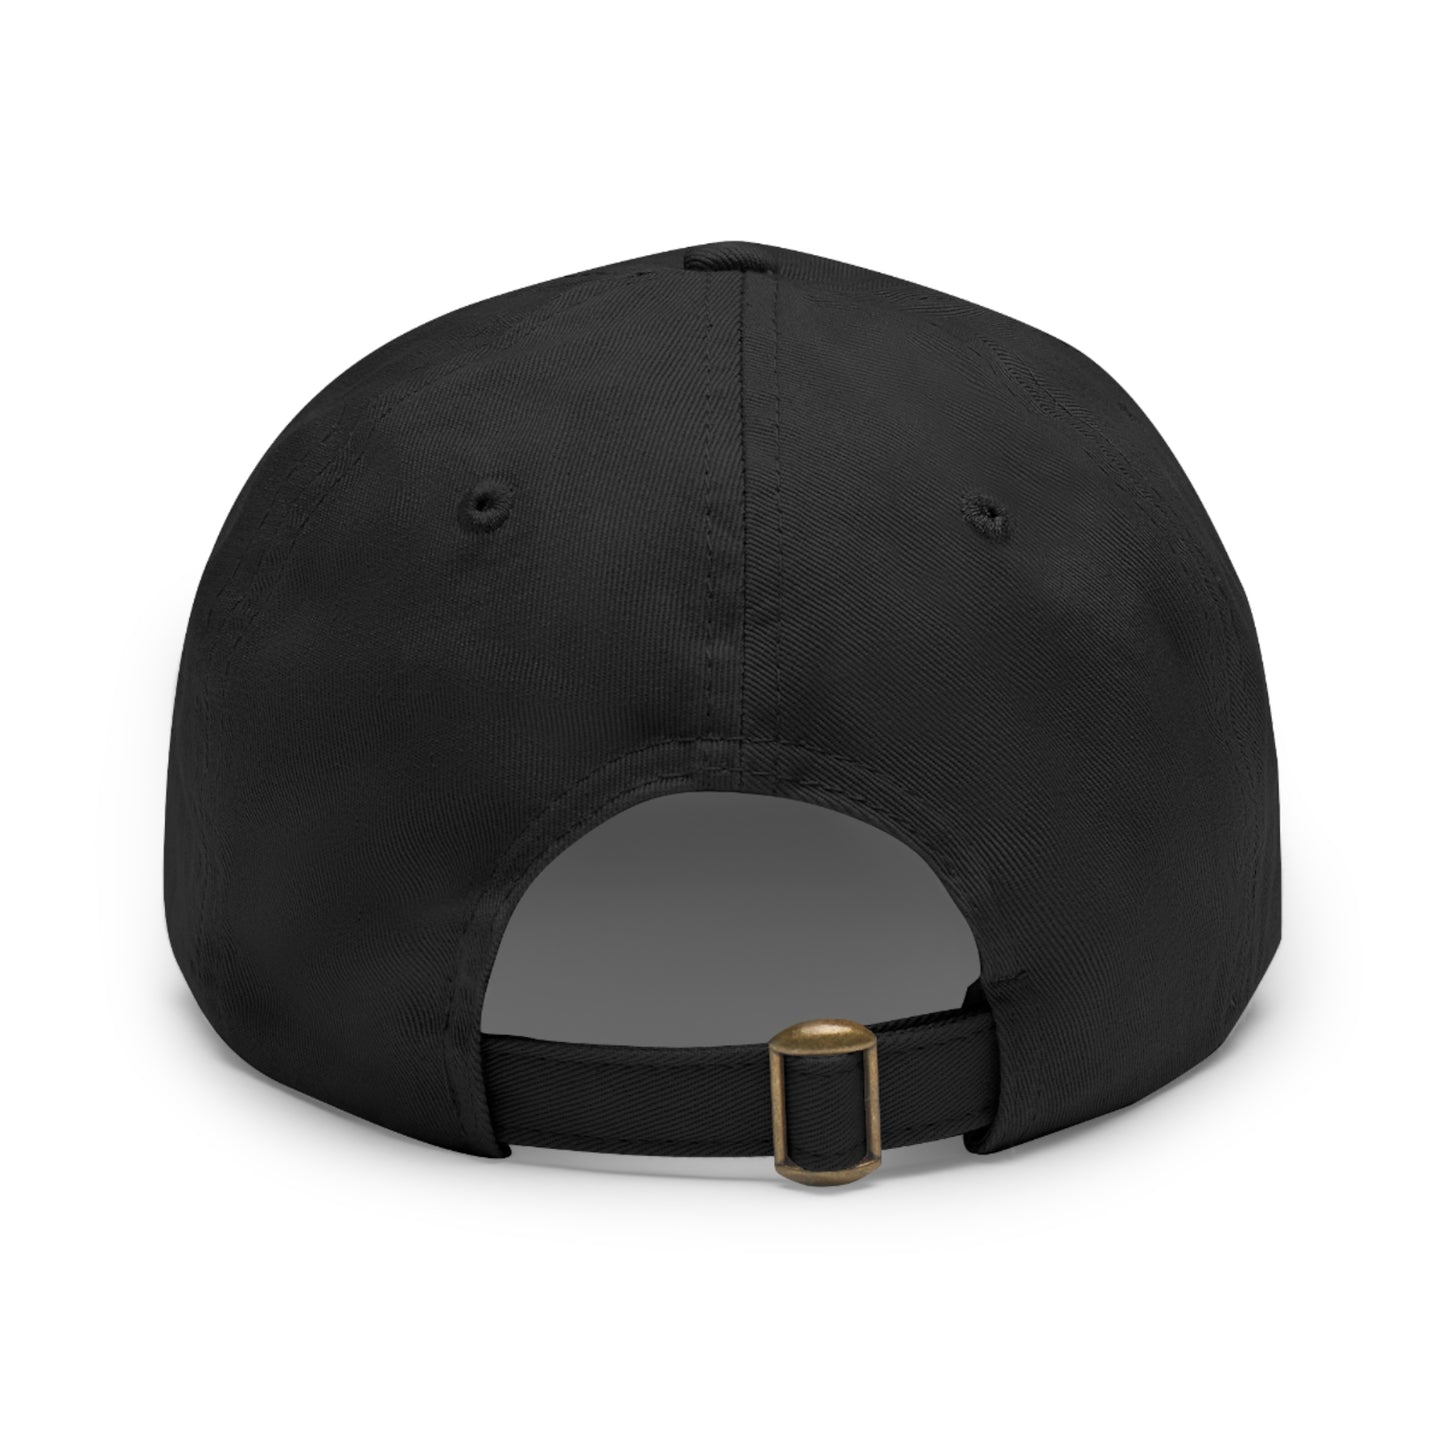 JITD CIRCLE CROSS HAT WITH LEATHER PATCH